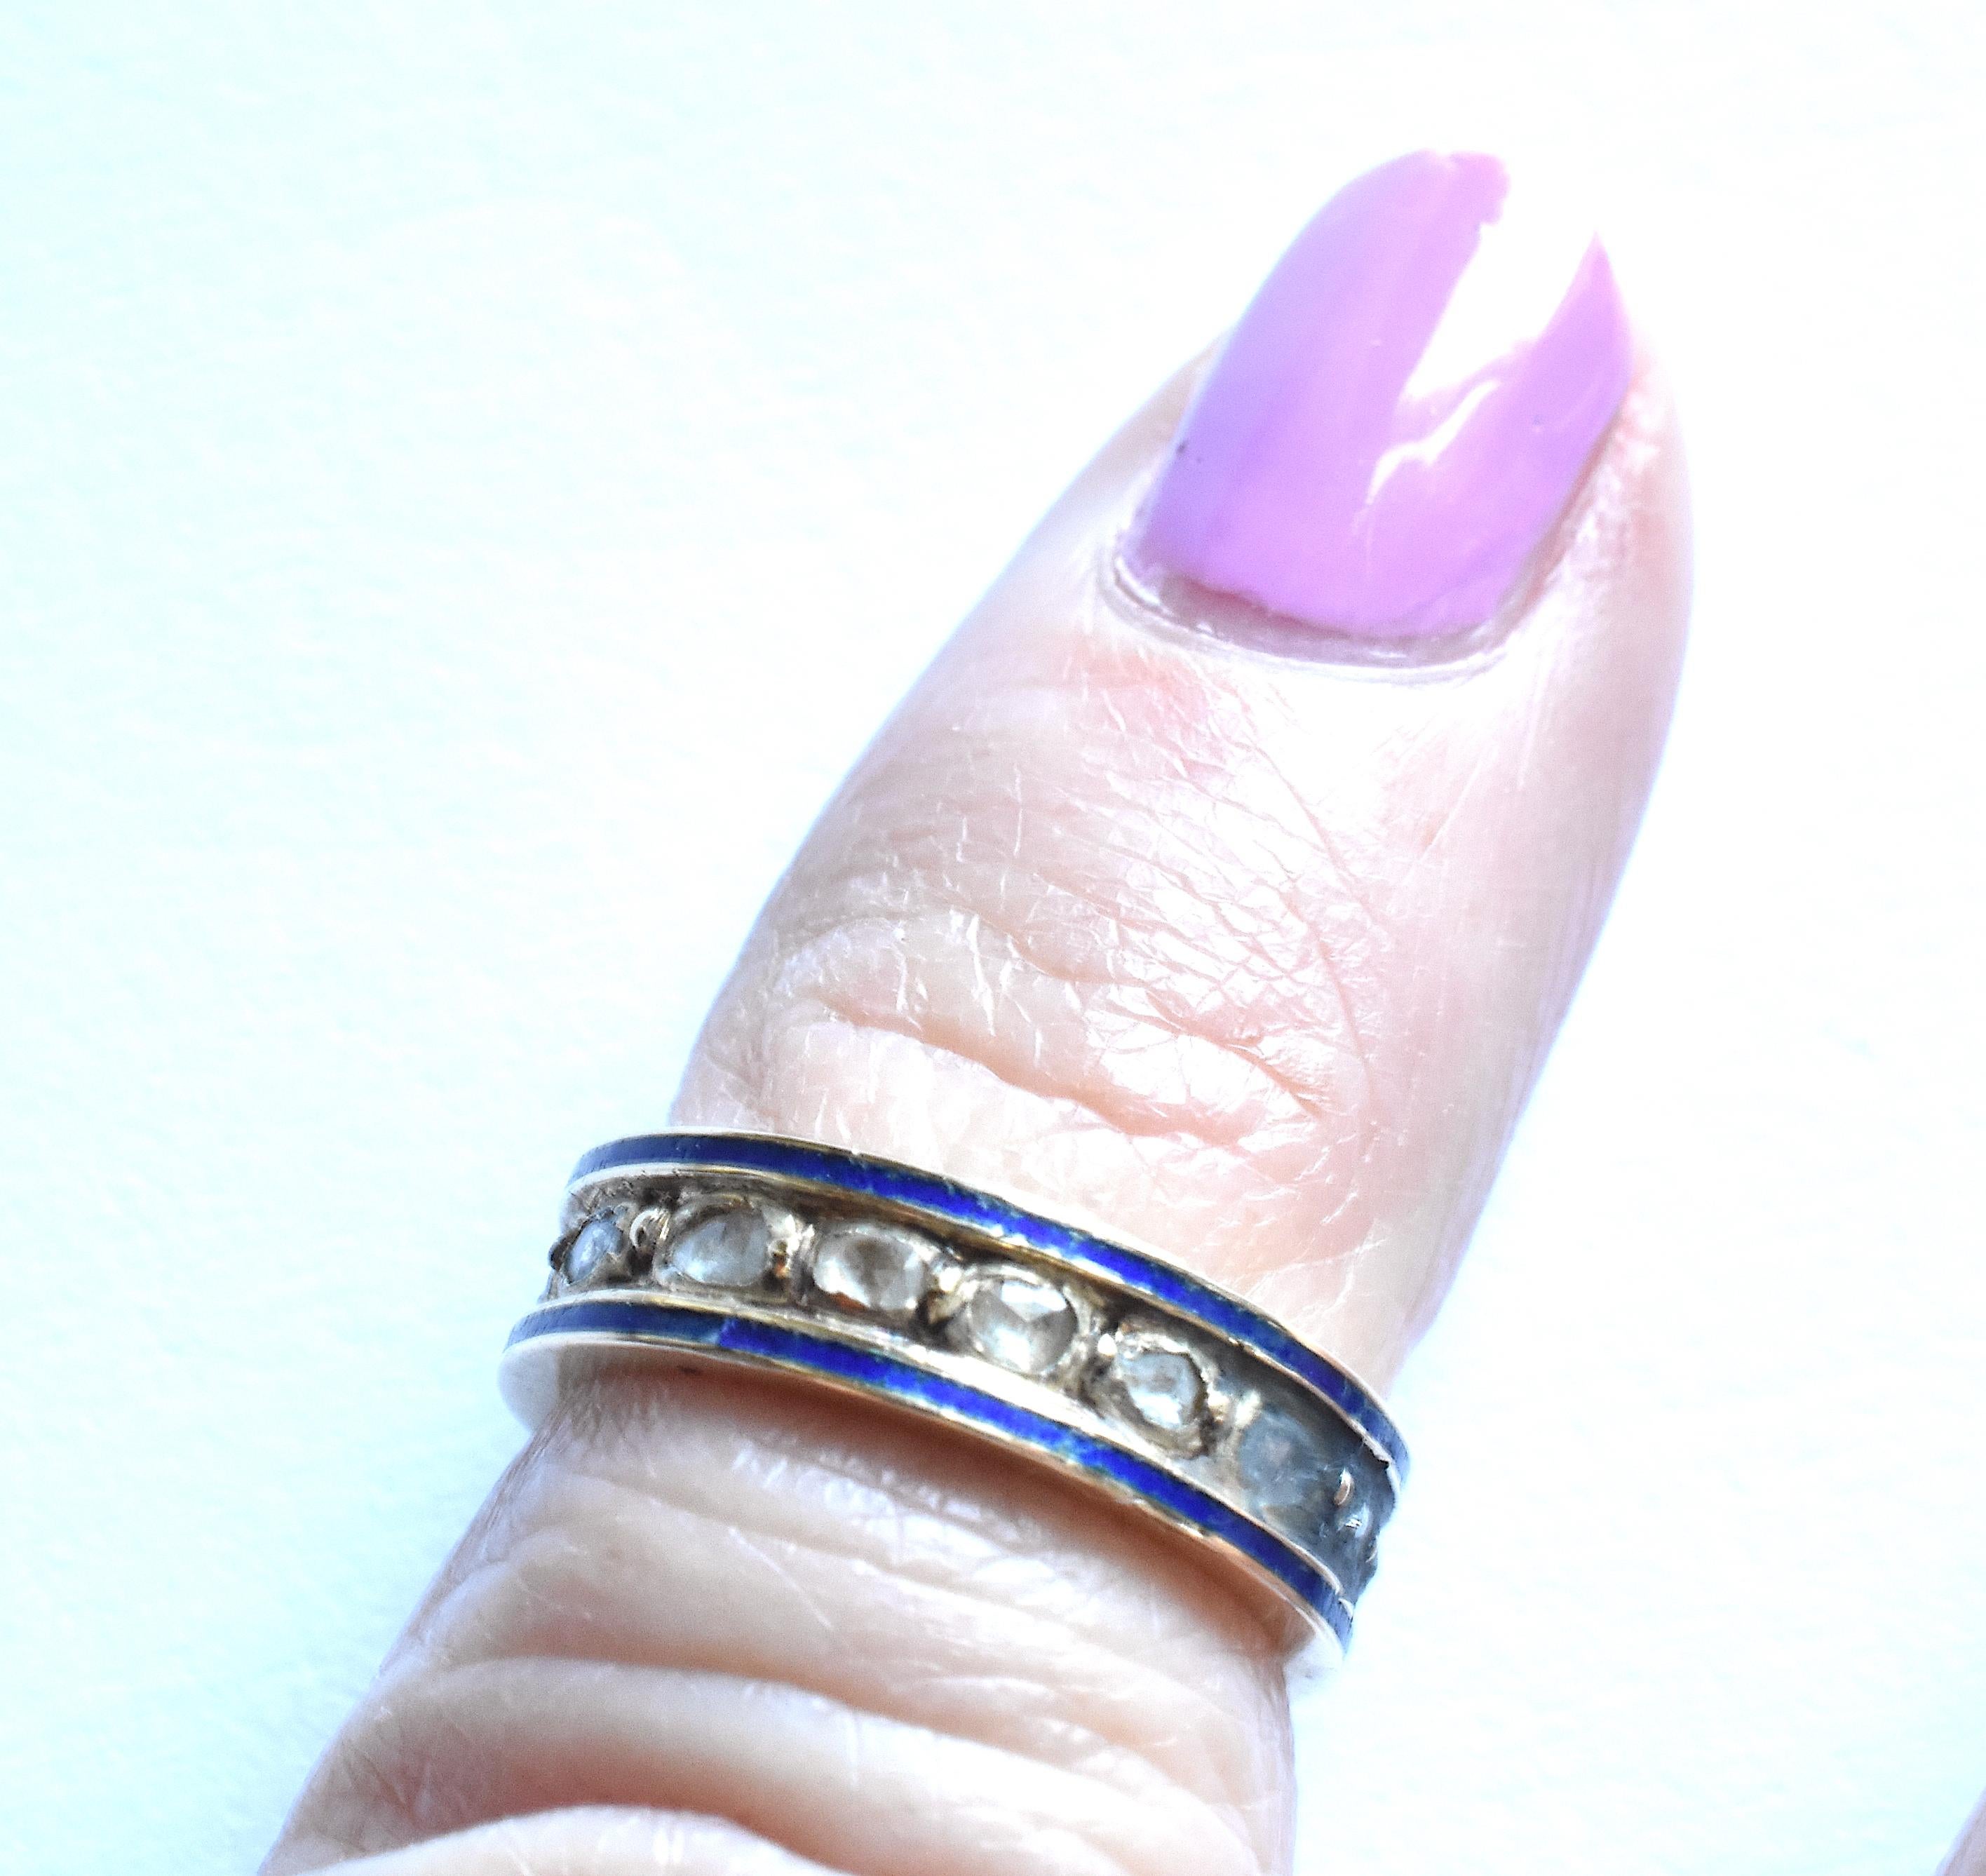 We love baby rings, worn around the knuckle or worn clipped to a large split ring and worn around a chain, or simply collected in honor of a new baby. Our baby ring has rose diamonds encased in gold, spaced evenly around the band. The band has a